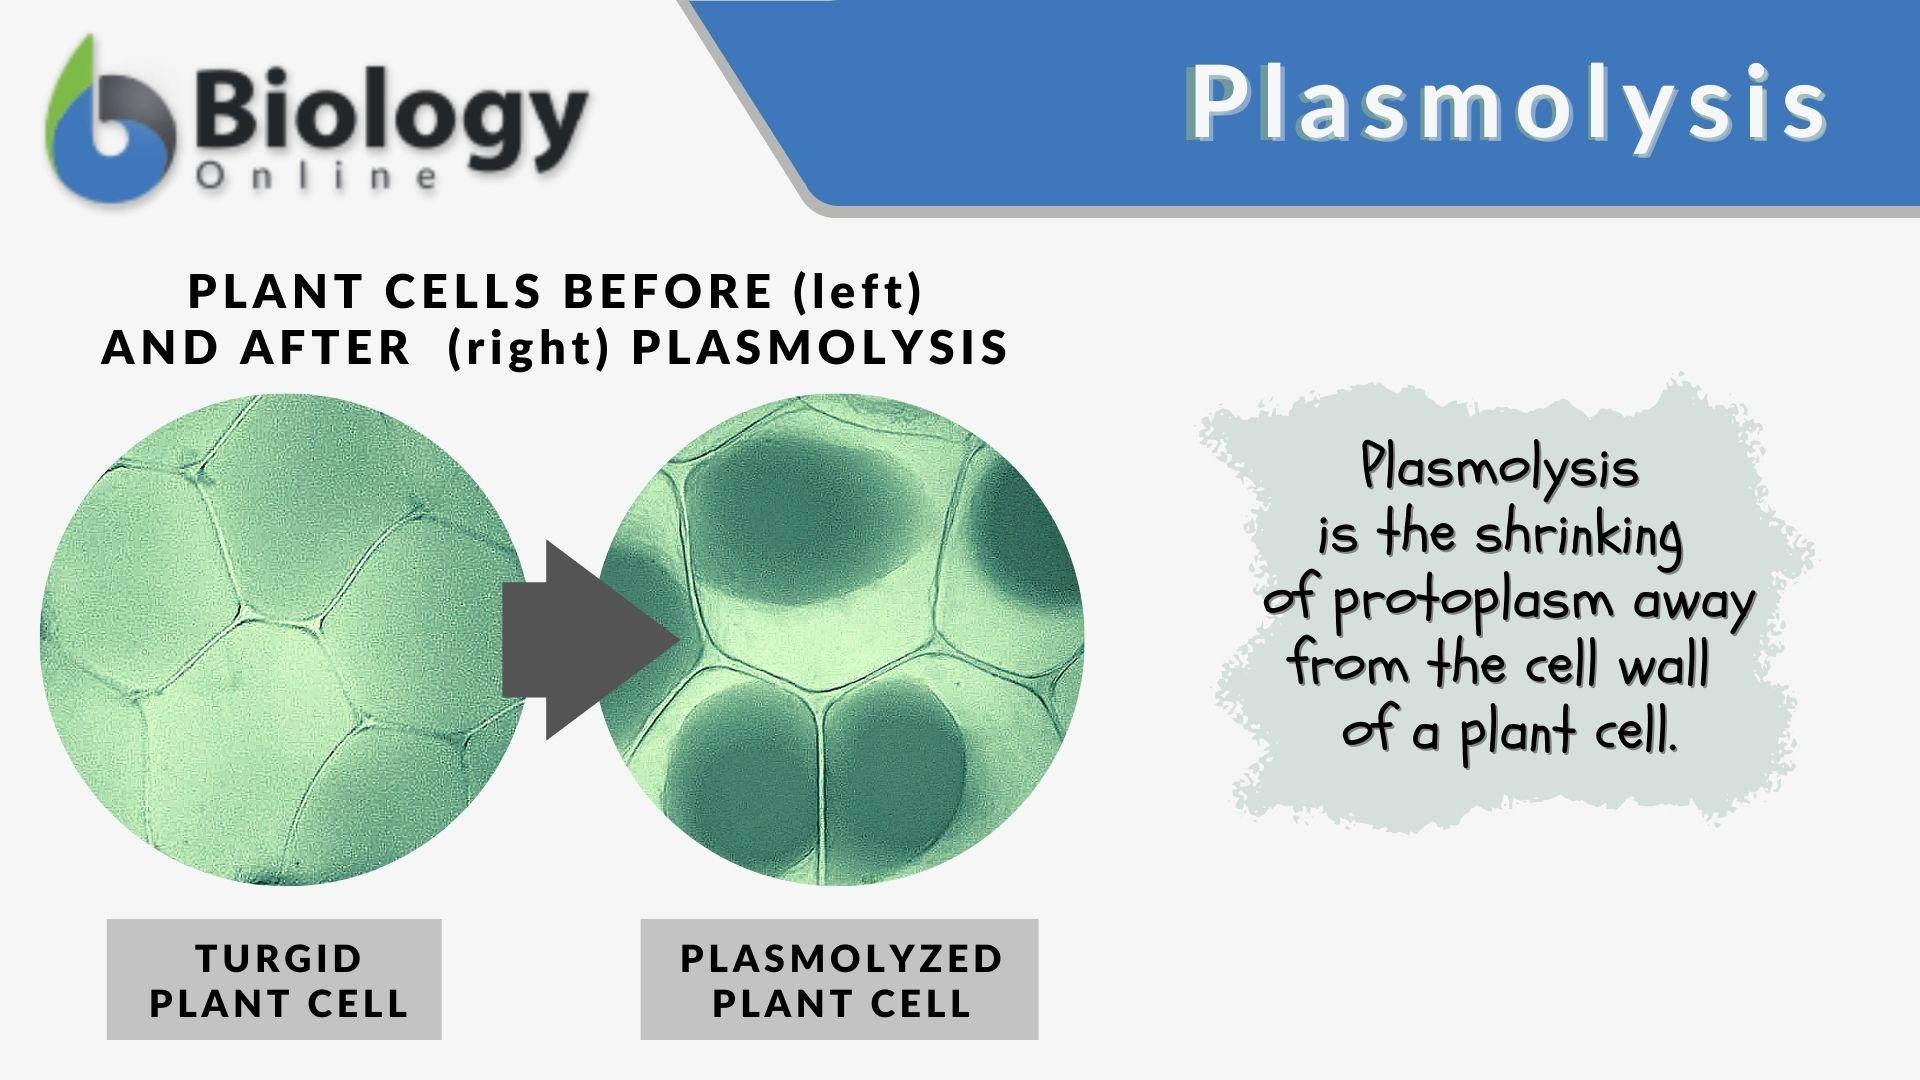 Plasmolysis Definition and Examples - Biology Online Dictionary